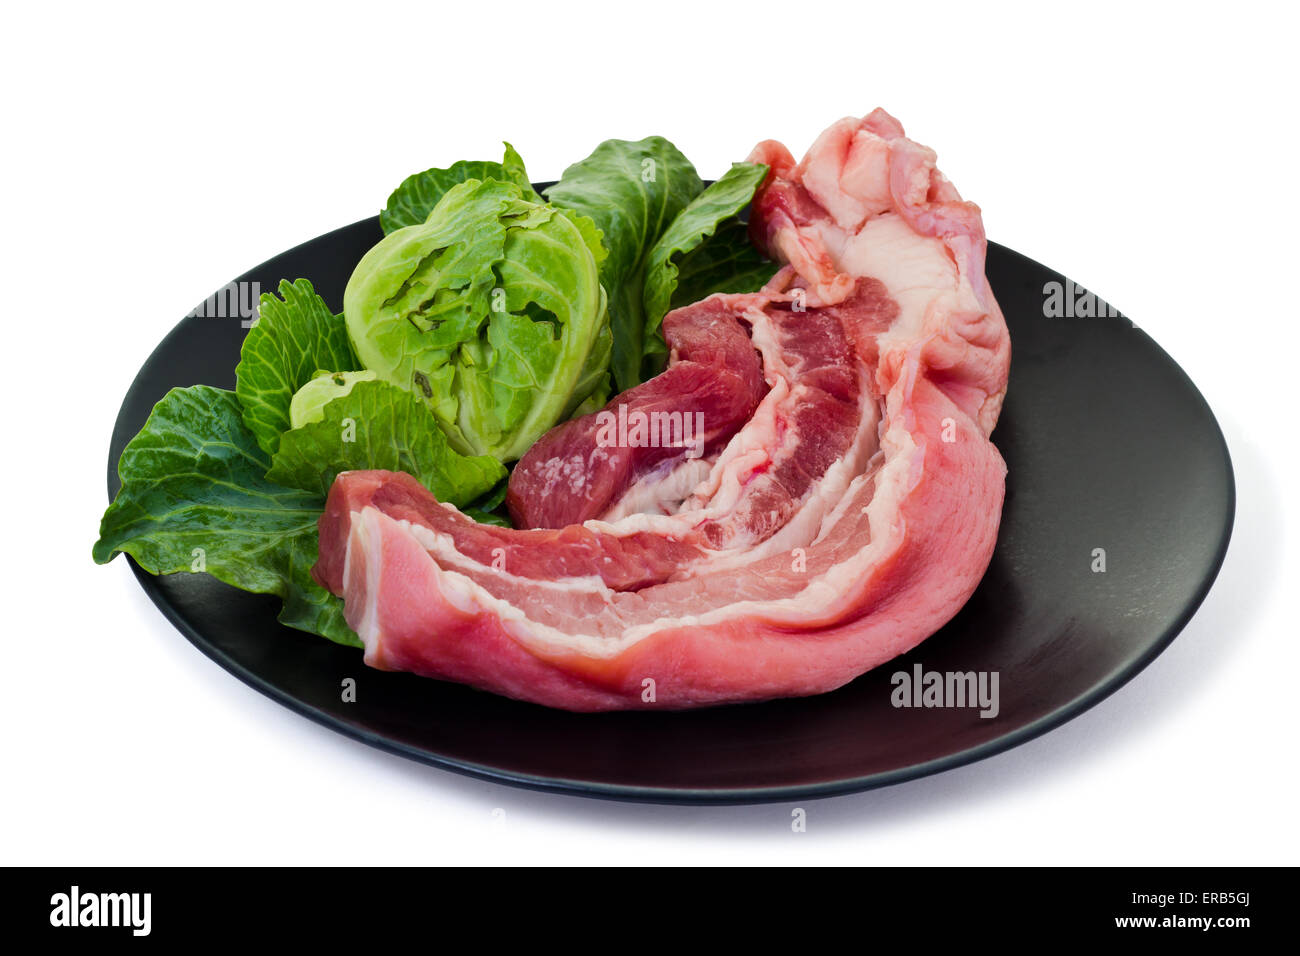 Raw streaky pork on black plate, isolated on white background and clipping path Stock Photo